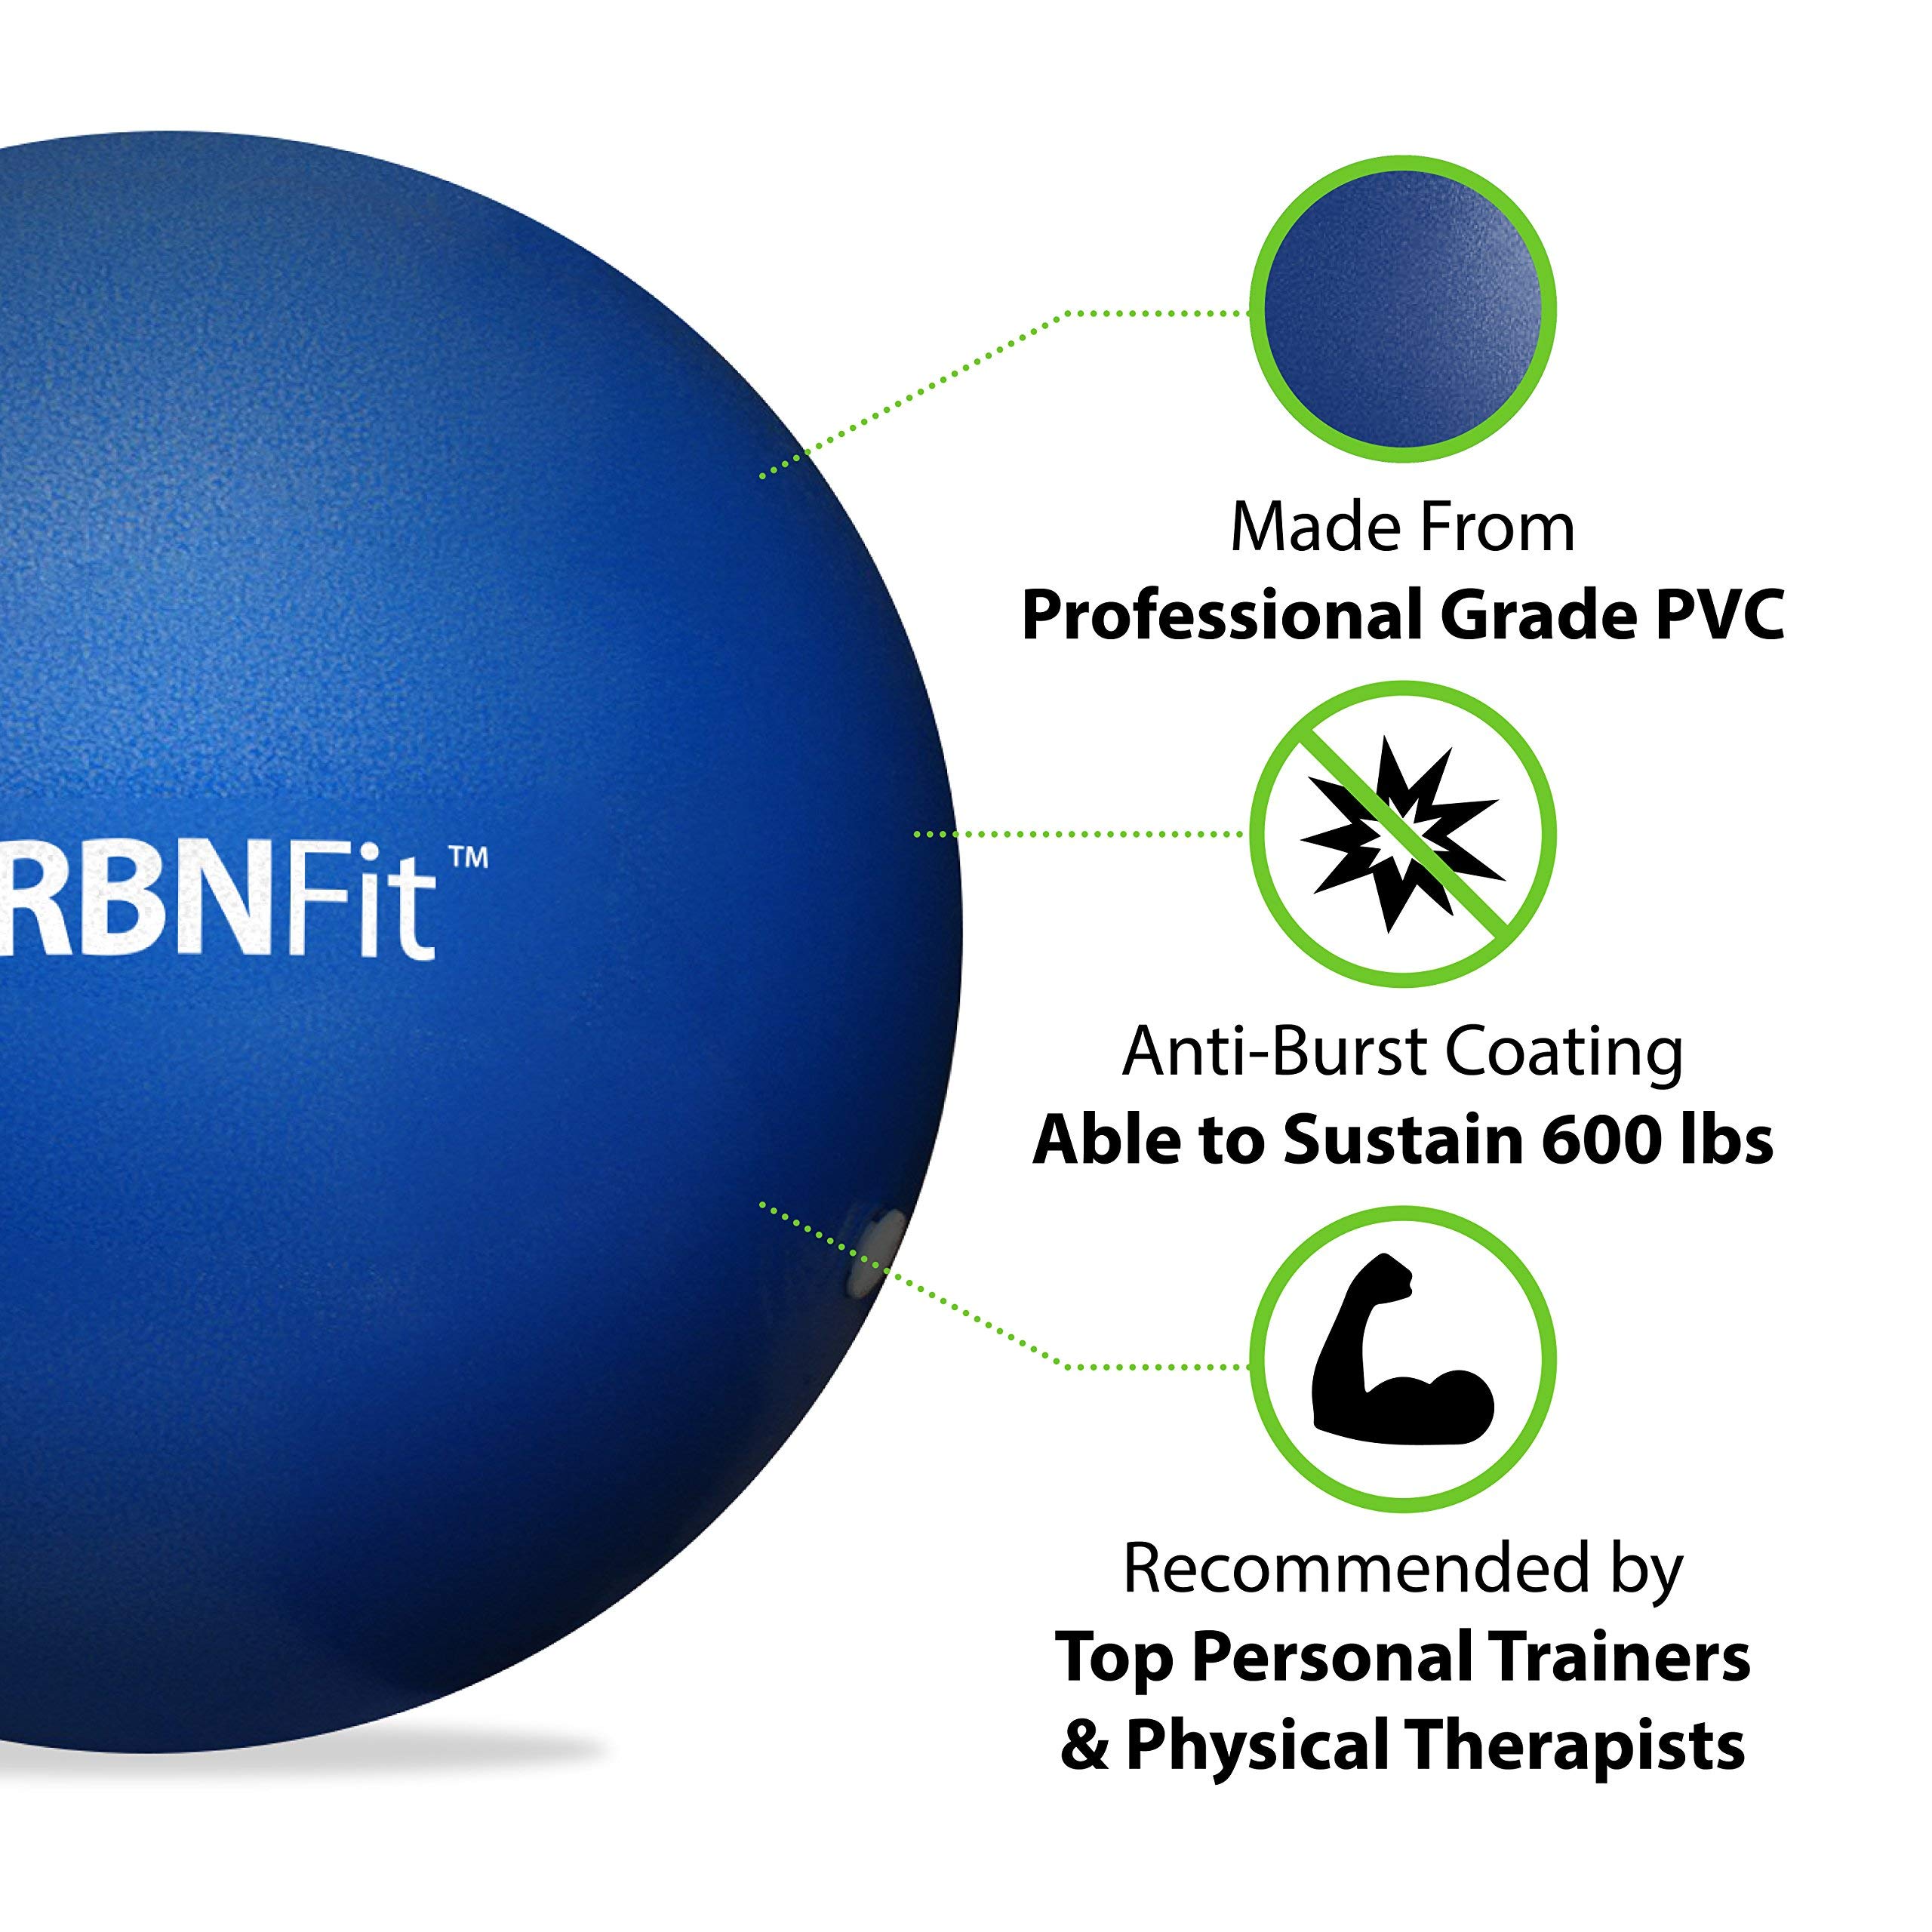 URBNFit Small Exercise Ball - 9-inch Mini Pilates Ball with Fitness Guide for Yoga, Barre, Physical Therapy, Stretching & Core Stability Workout